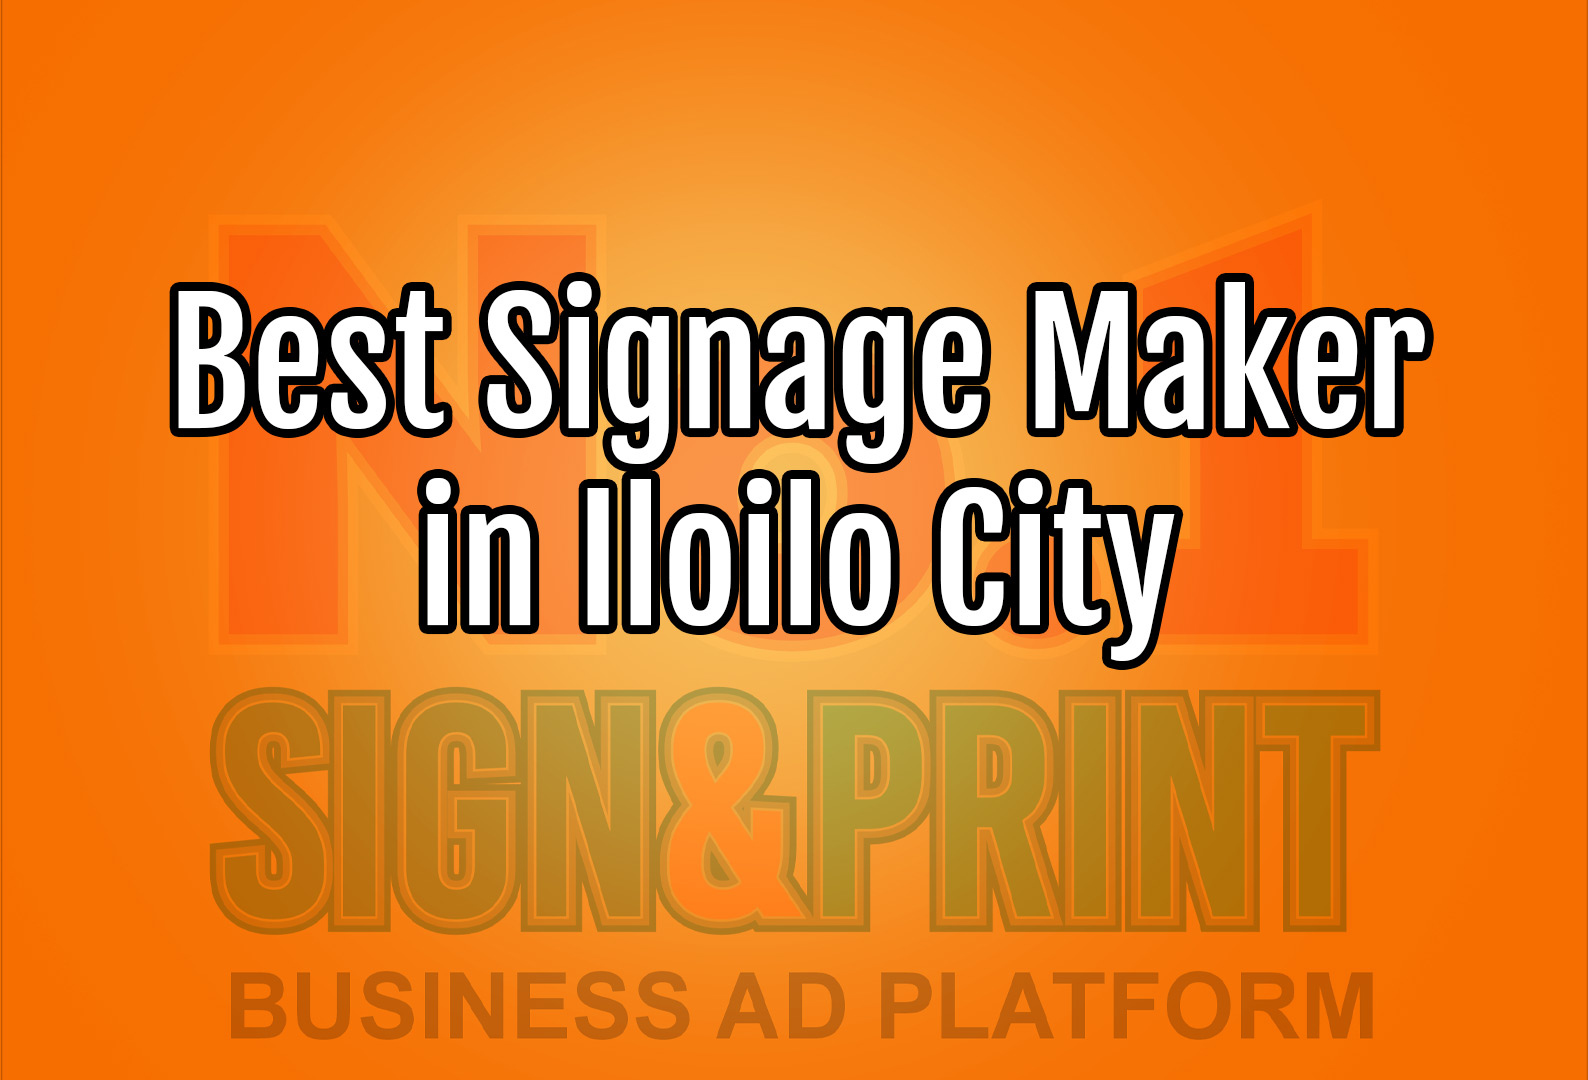 How to Find Best Signage Maker in Iloilo?